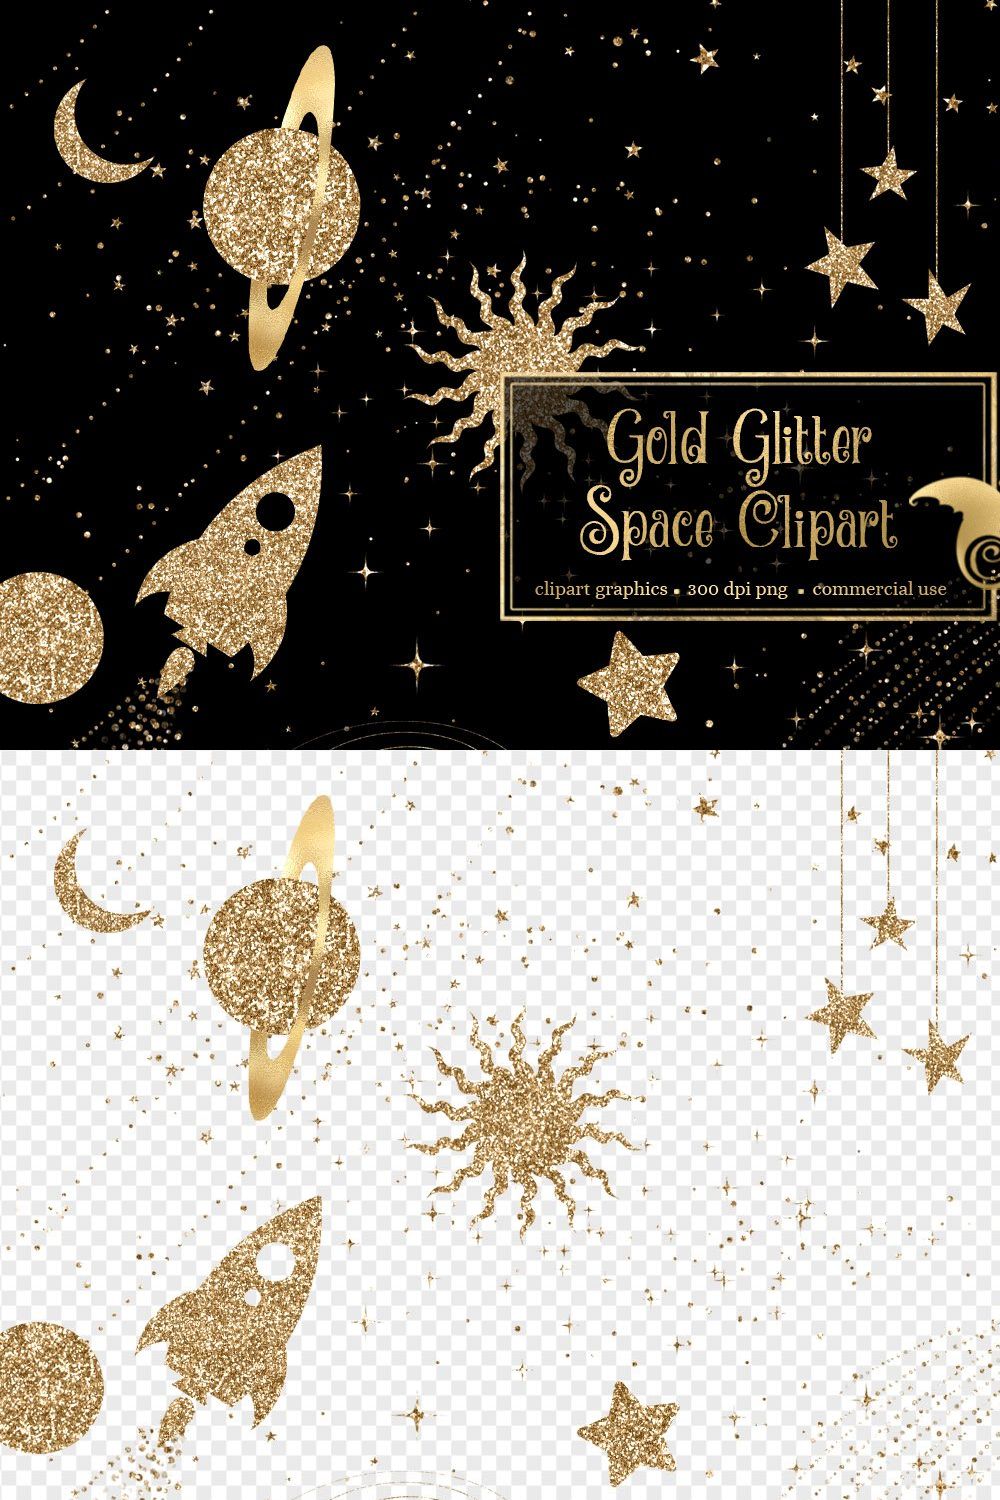 Gold Glitter Space Clipart pinterest preview image.